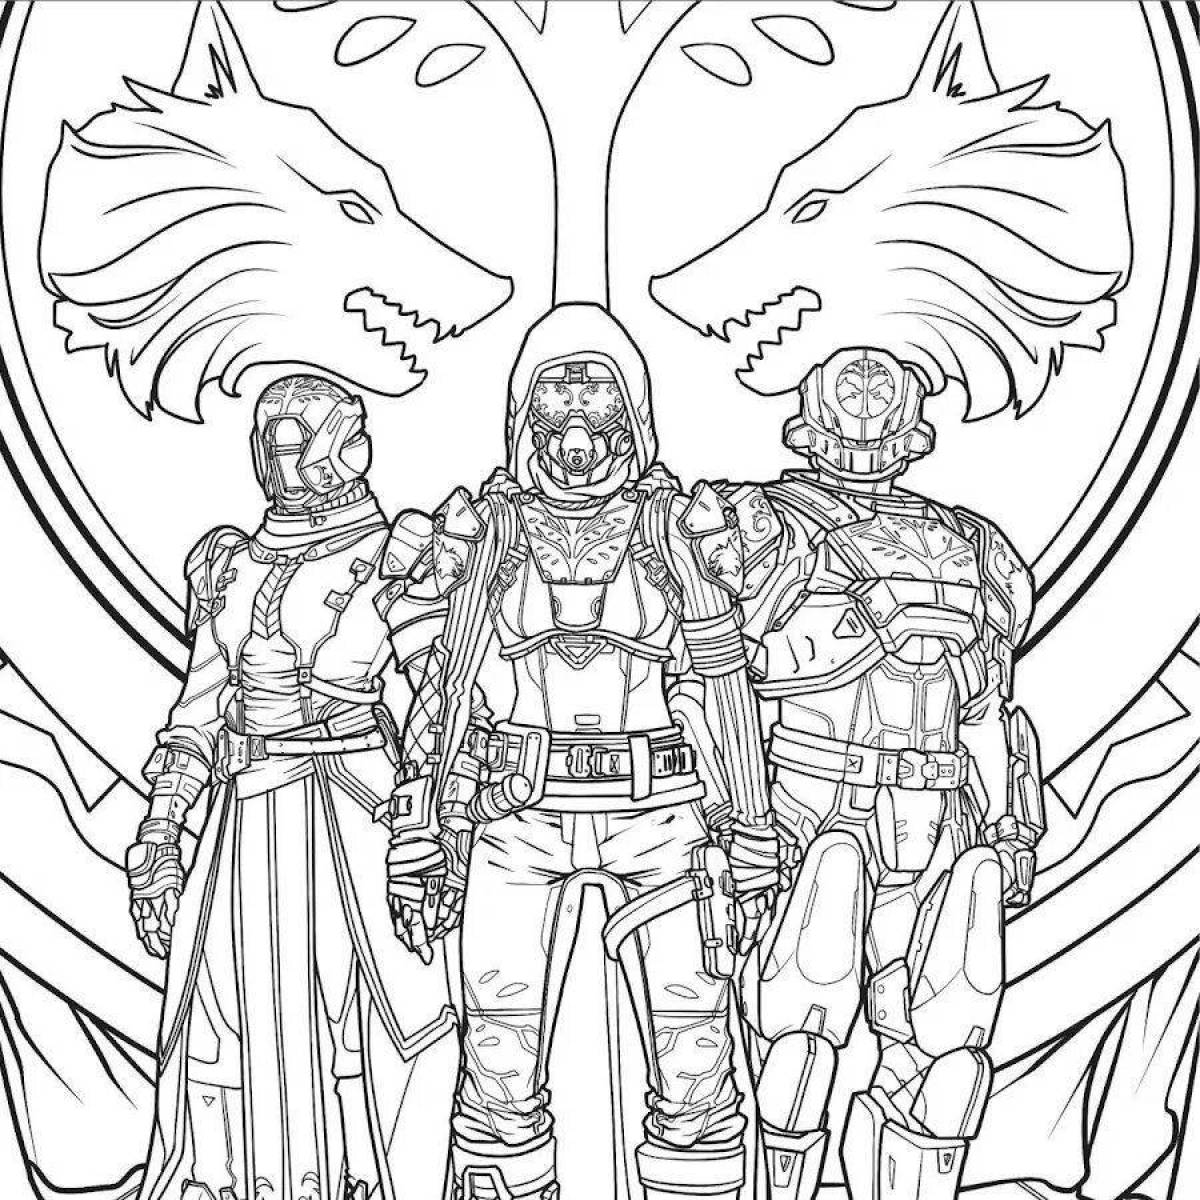 Mystical Confrontation coloring page